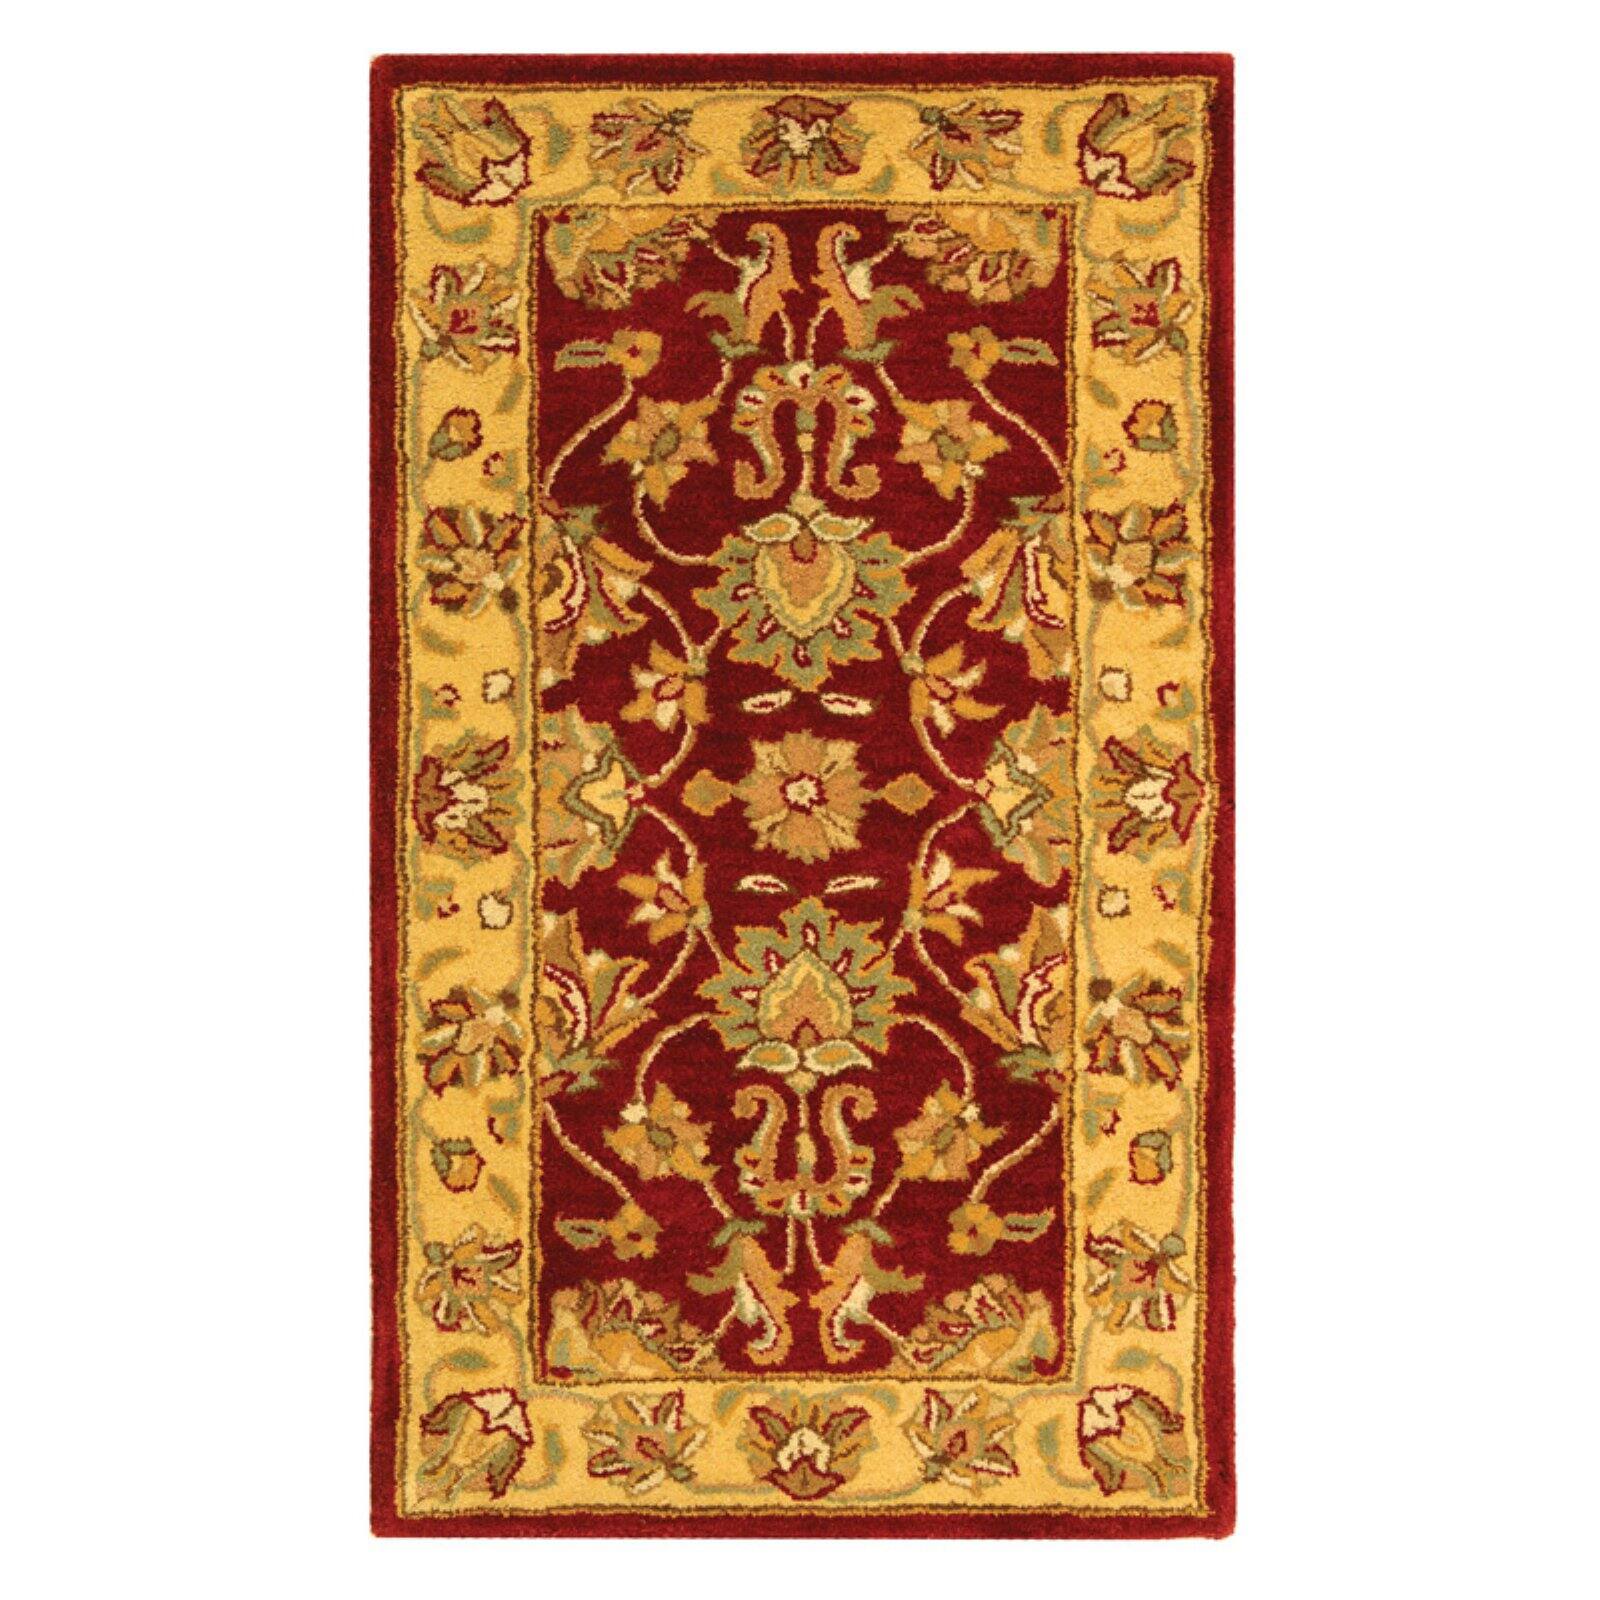 SAFAVIEH Heritage Regis Traditional Wool Area Rug, Red/Gold, 4' x 6' - image 2 of 9